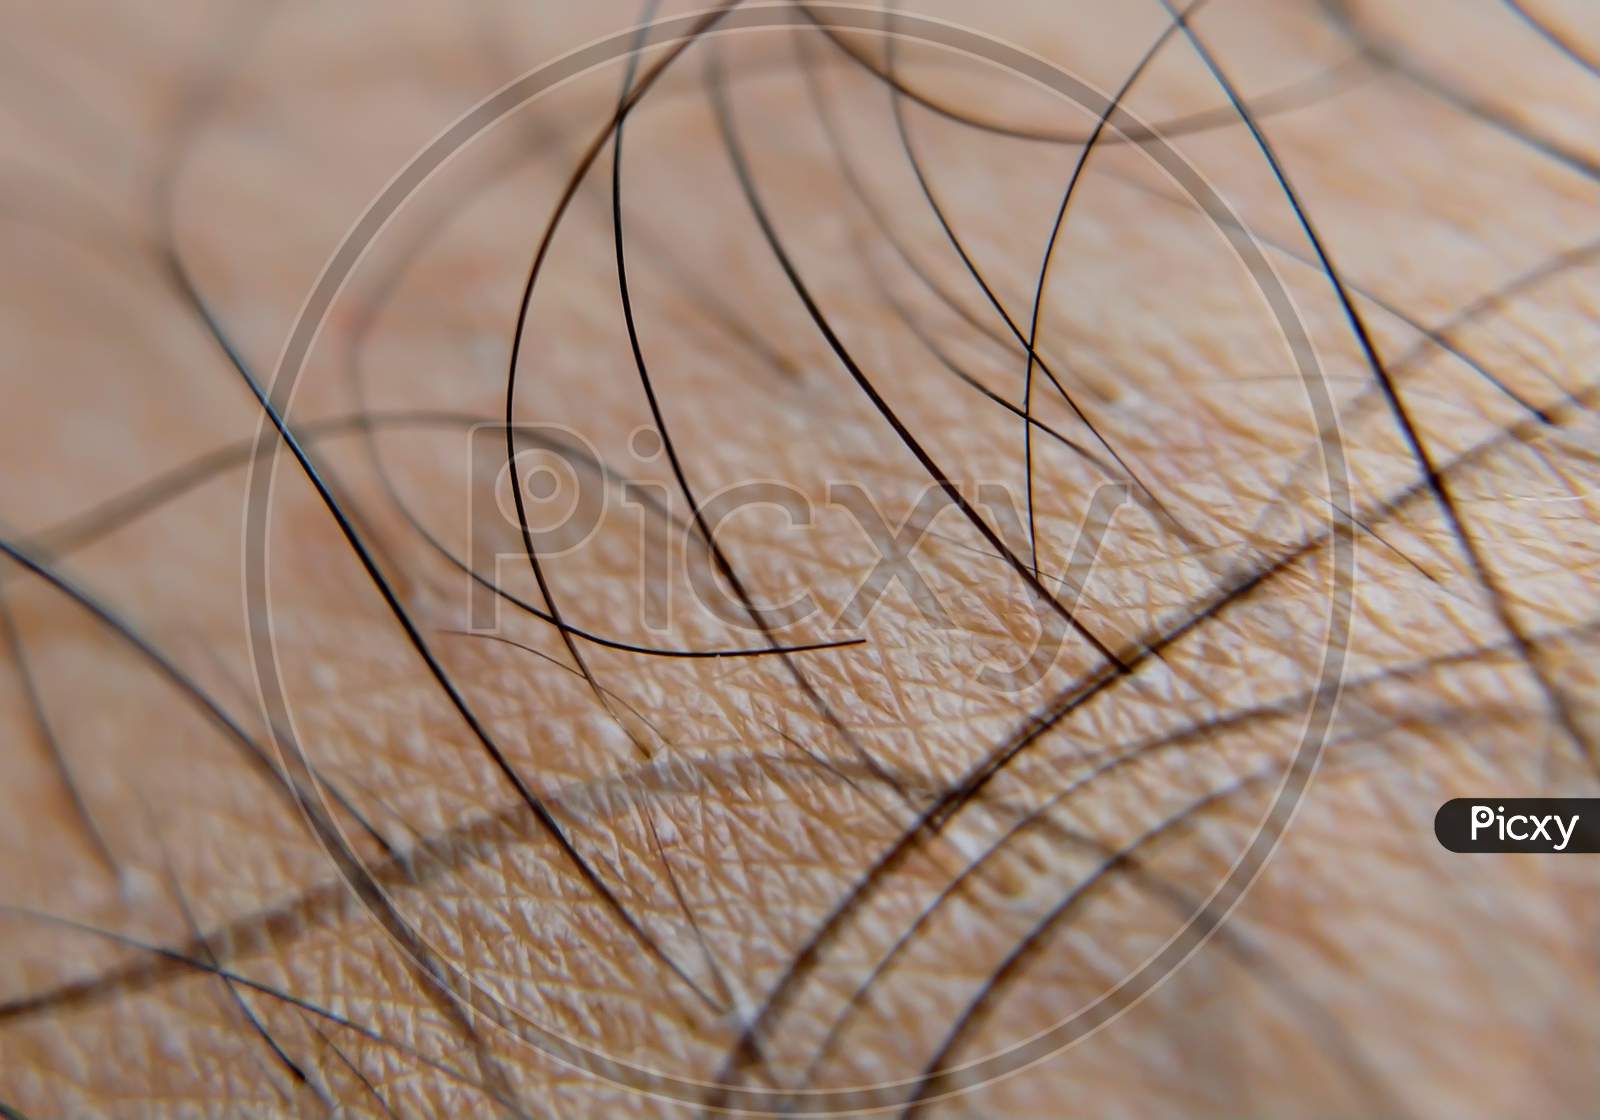 Extremely Close up of strands of hair root.